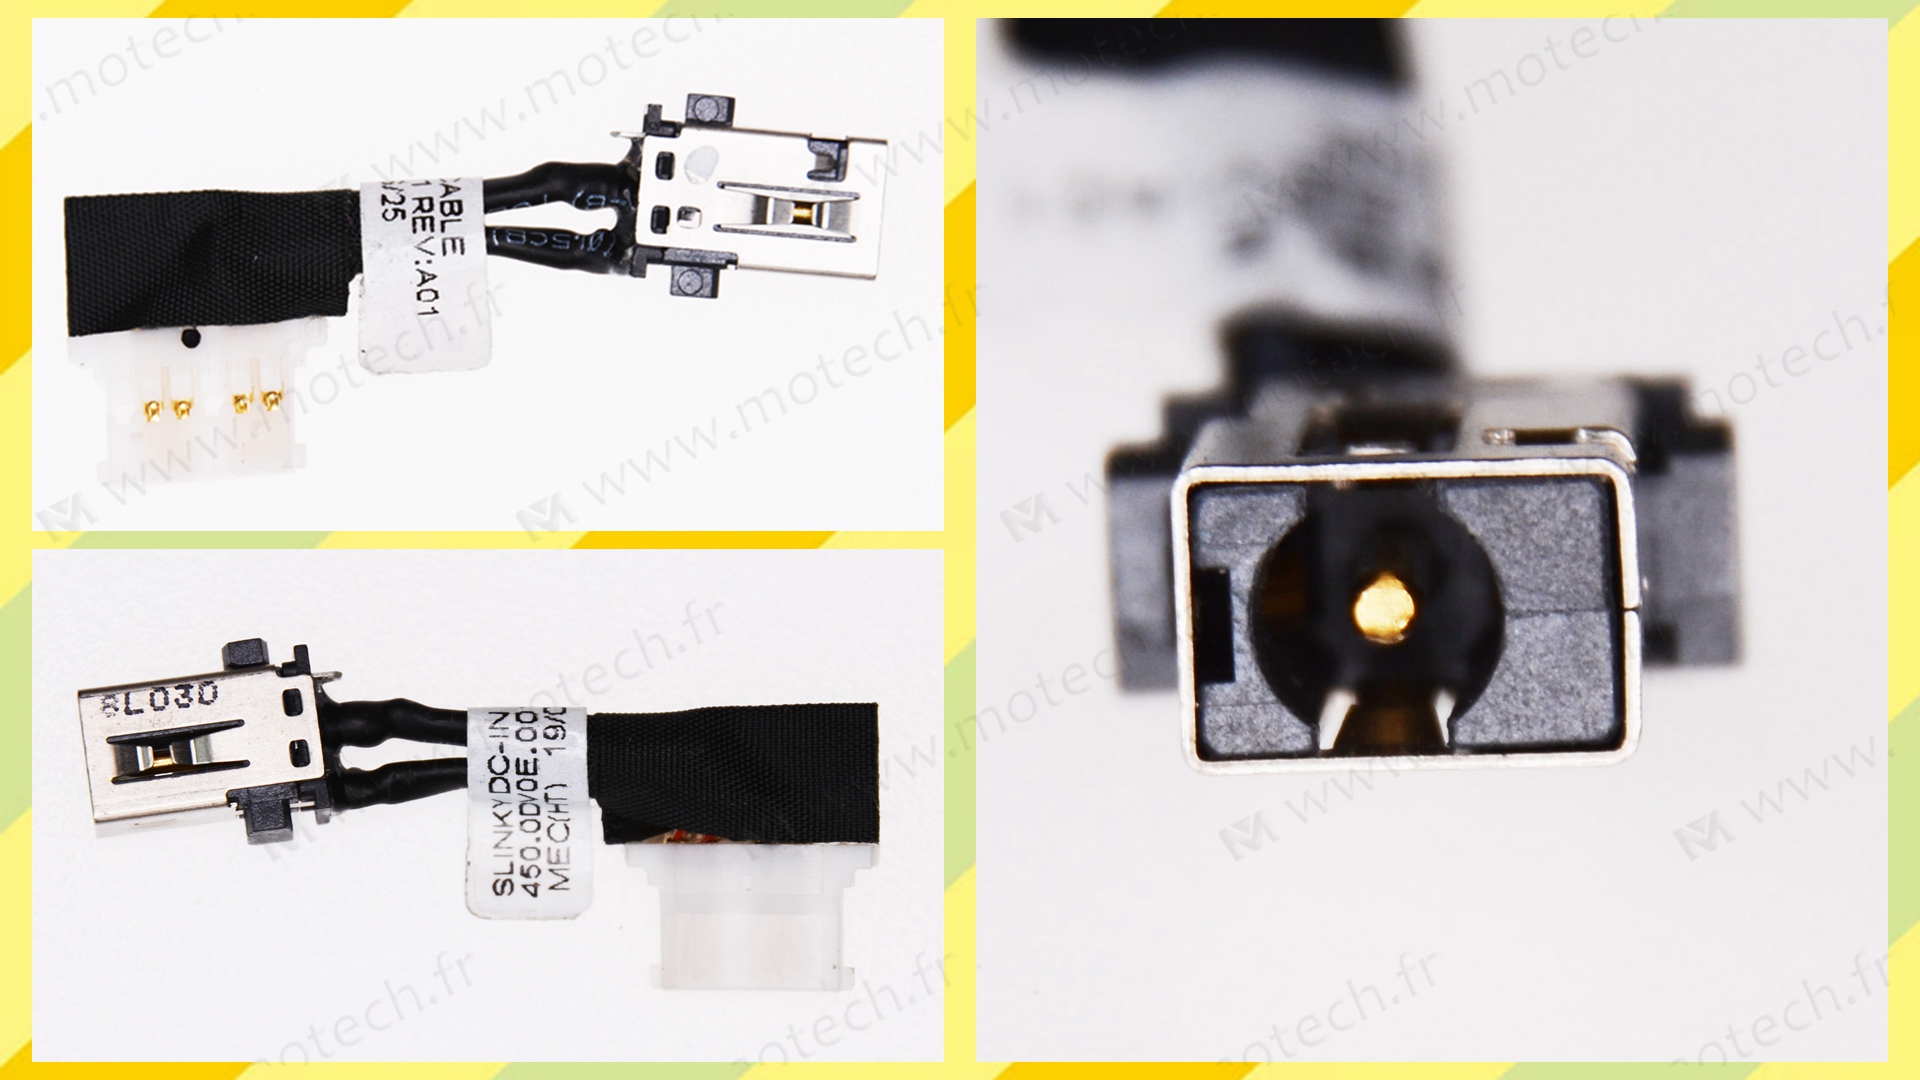 Acer SP314-51 charging connector, Acer SP314-51 DC Power Jack, Acer SP314-51 DC IN Cable, Acer SP314-51 Power Jack, Acer SP314-51 plug, Acer SP314-51 Jack socket, Acer SP314-51 connecteur de charge, 